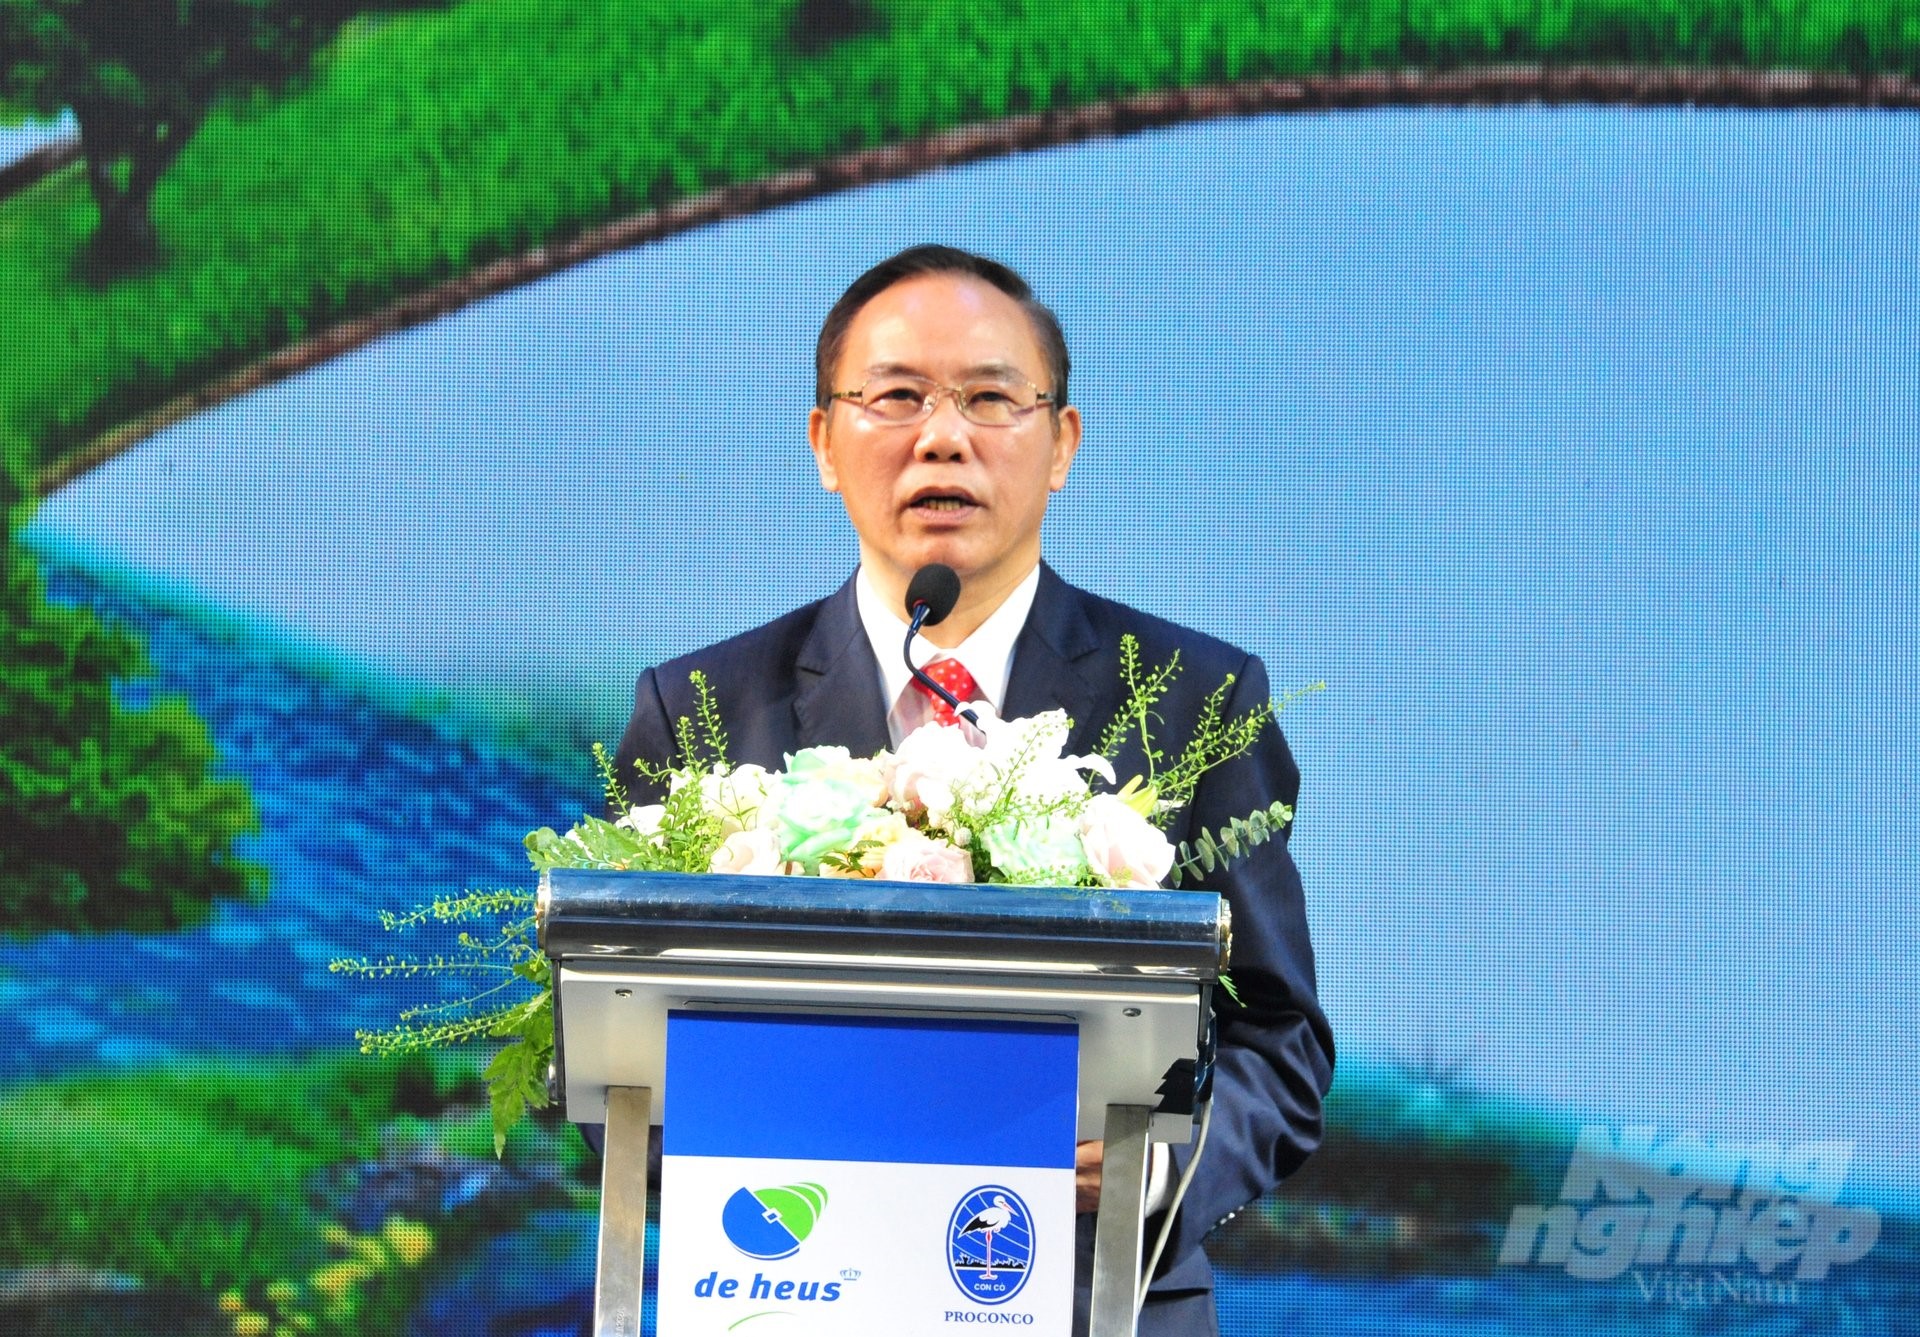 Mr. Phung Duc Tien, Deputy Minister of Agriculture and Rural Development, gave a directive speech at the inauguration ceremony of De Heus' pangasius feed factory. Photo: Le Hoang Vu.